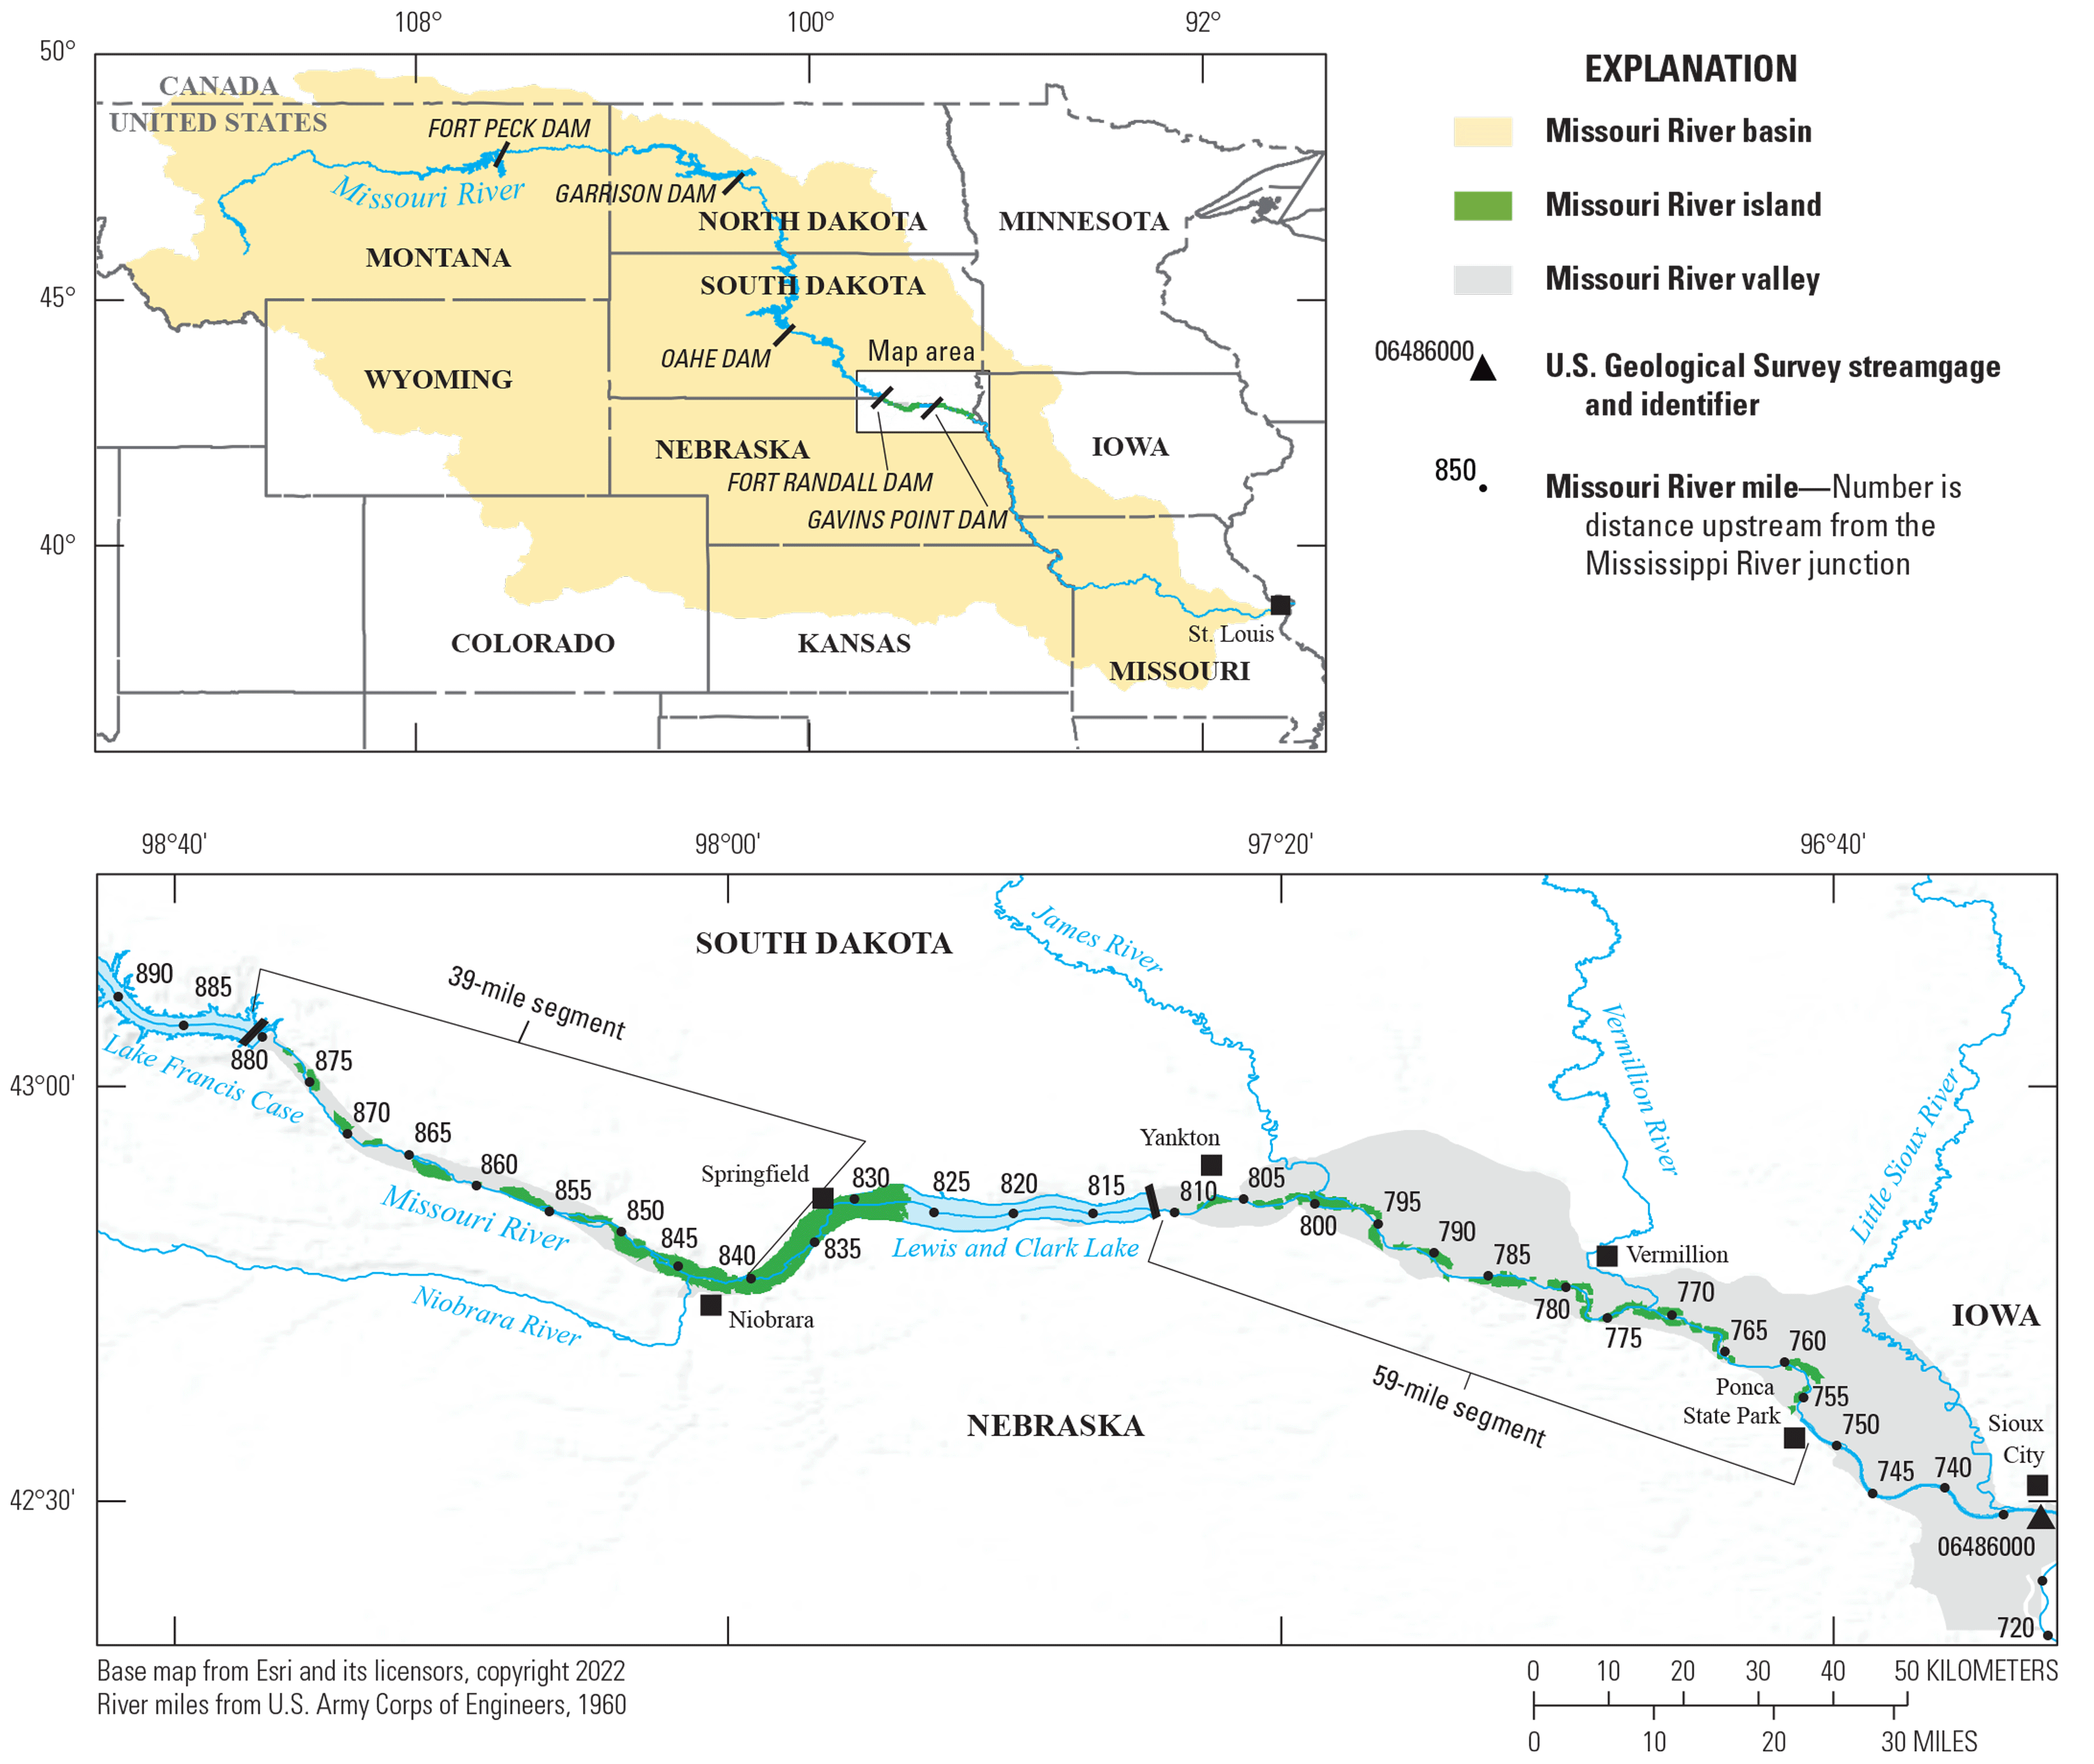 Map showing river with symbols for streamgages and river miles within Missouri River
                        basin